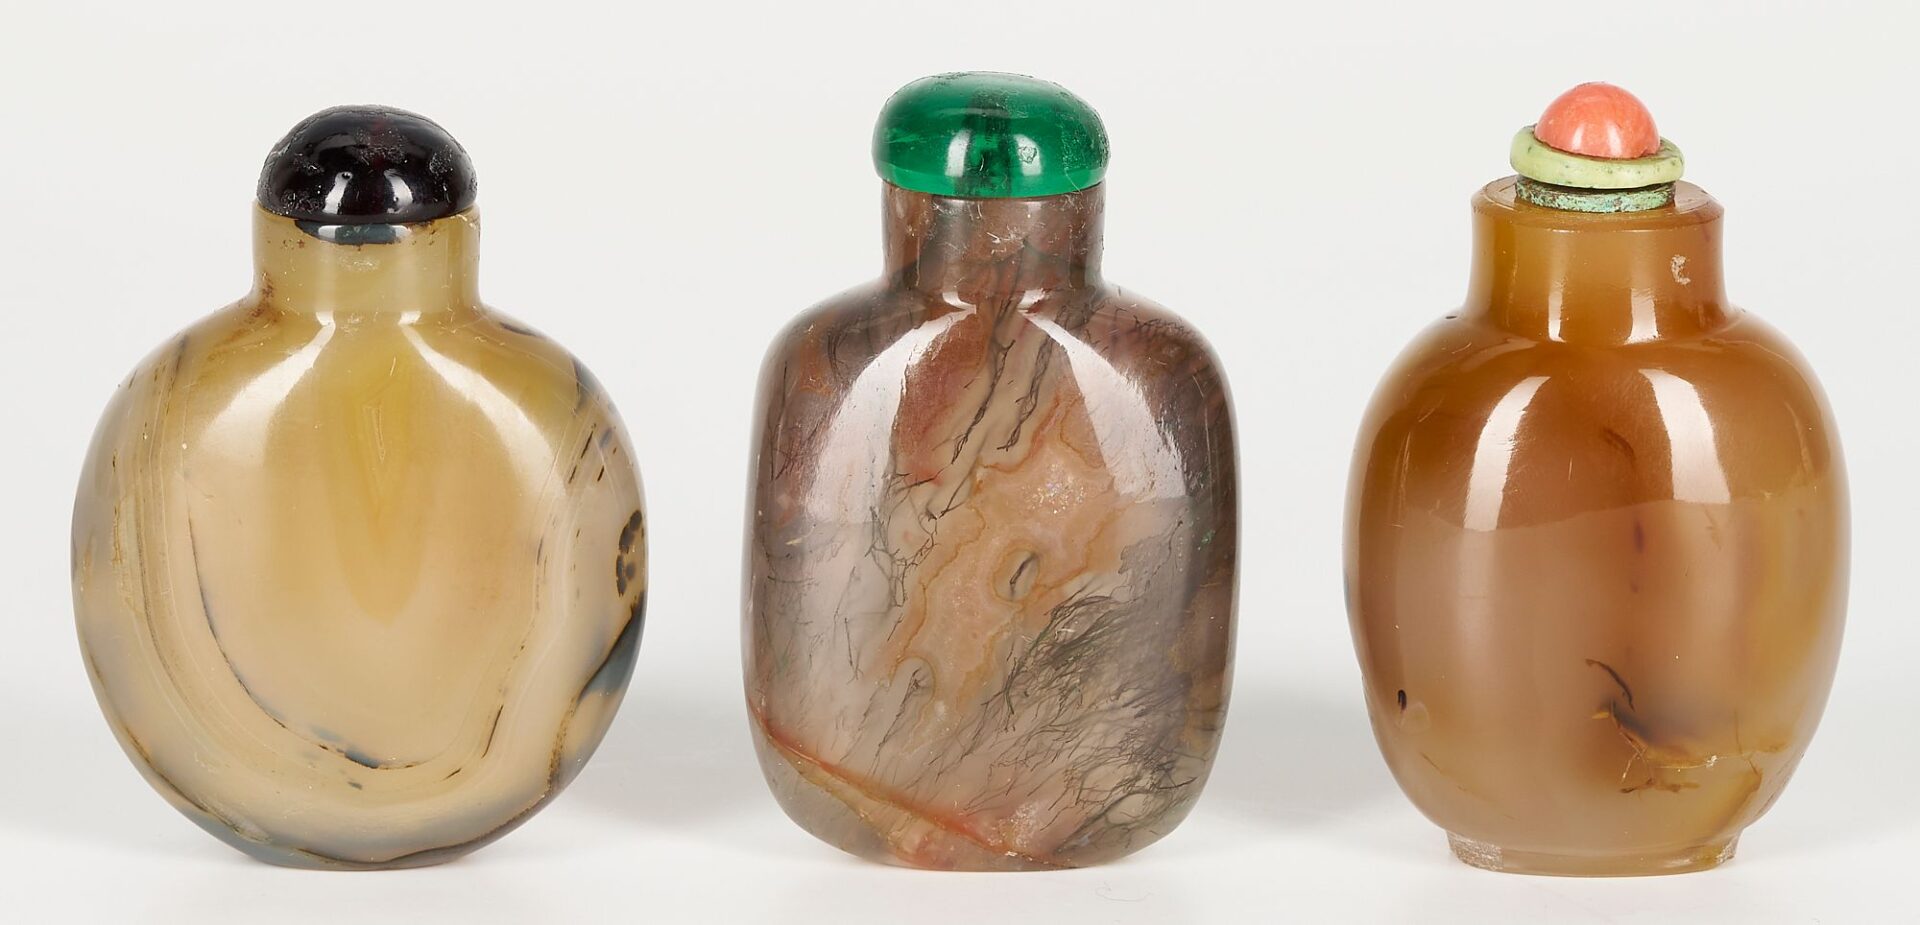 Lot 18: 3 Chinese Carved Moss Agate Snuff Bottles